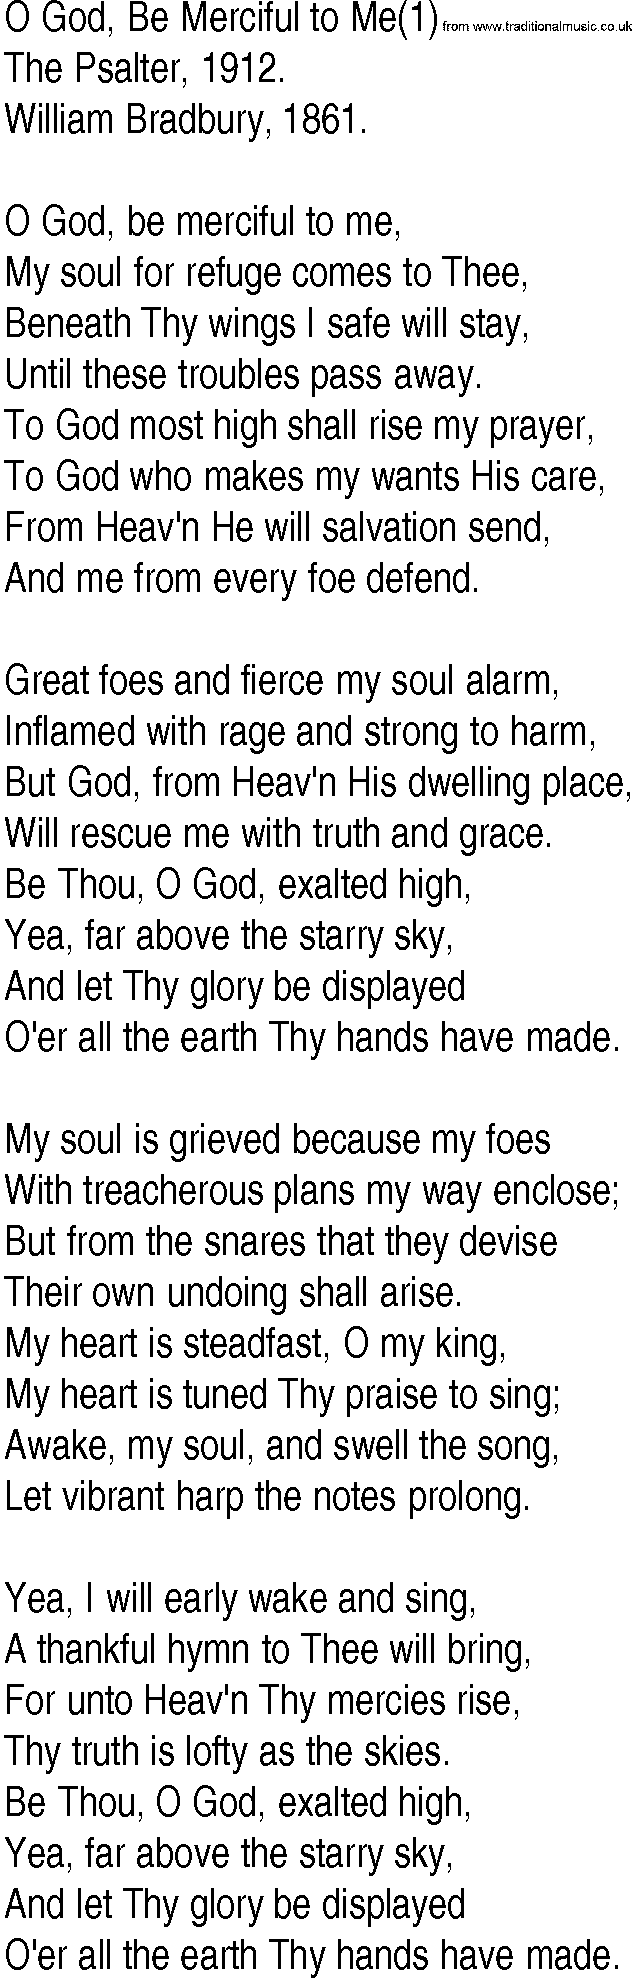 Hymn and Gospel Song: O God, Be Merciful to Me(1) by The Psalter lyrics